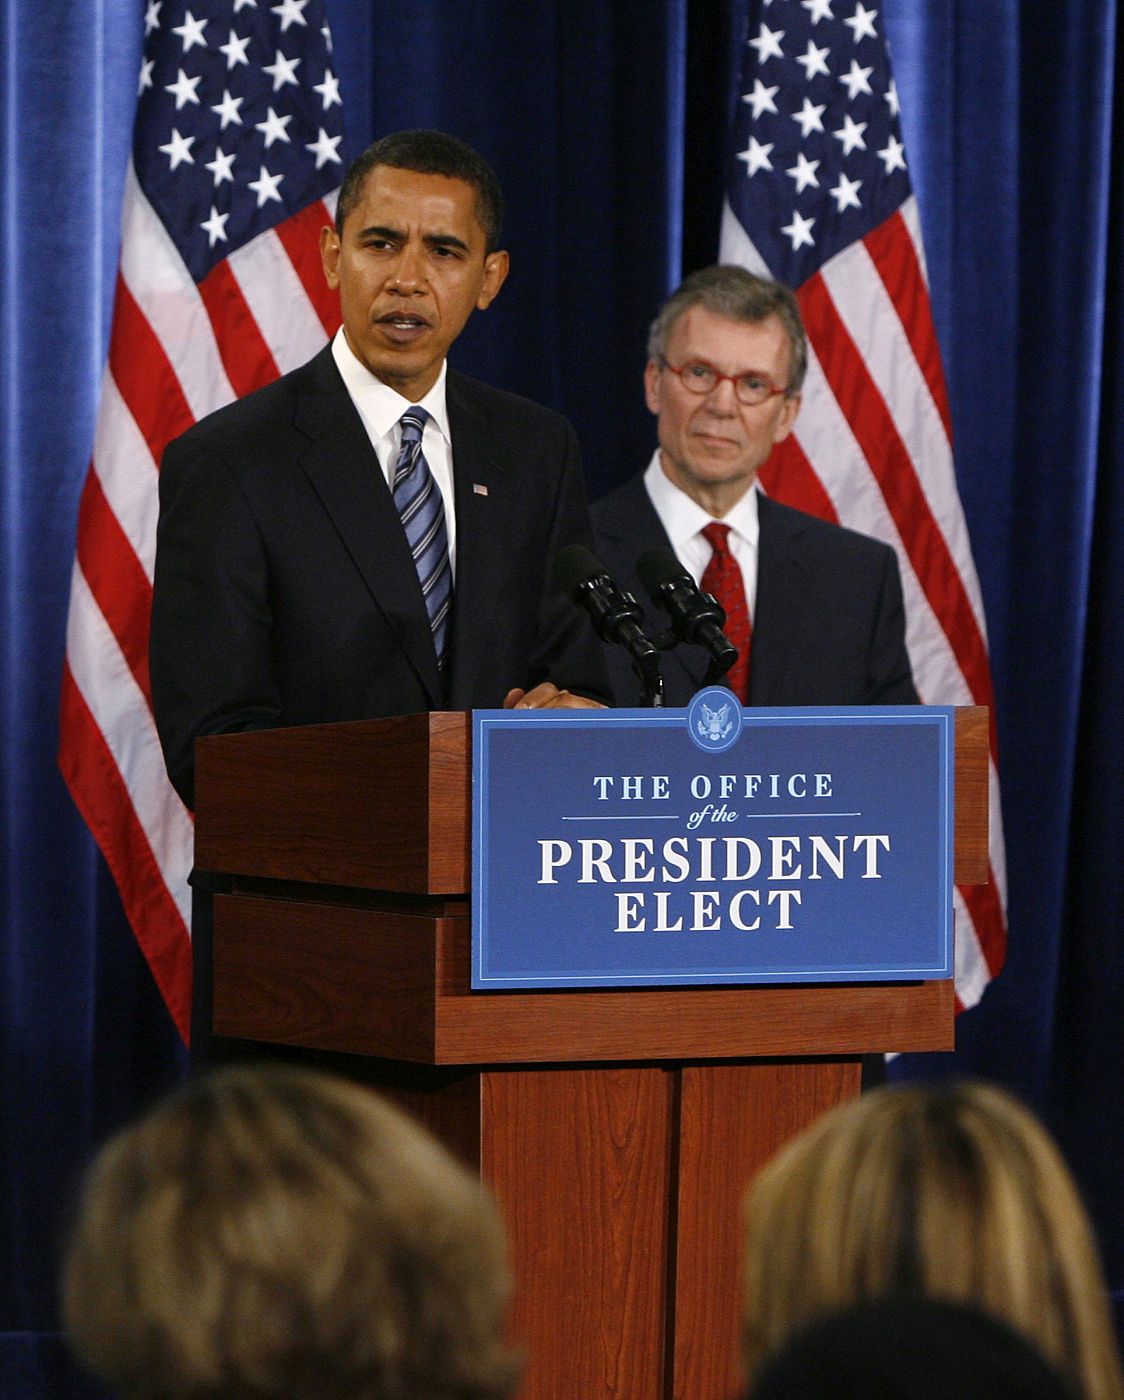 President-elect Barack Obama introduces former U.S. Senate Majority Leader Tom Daschle as nominee for secretary of health and human services